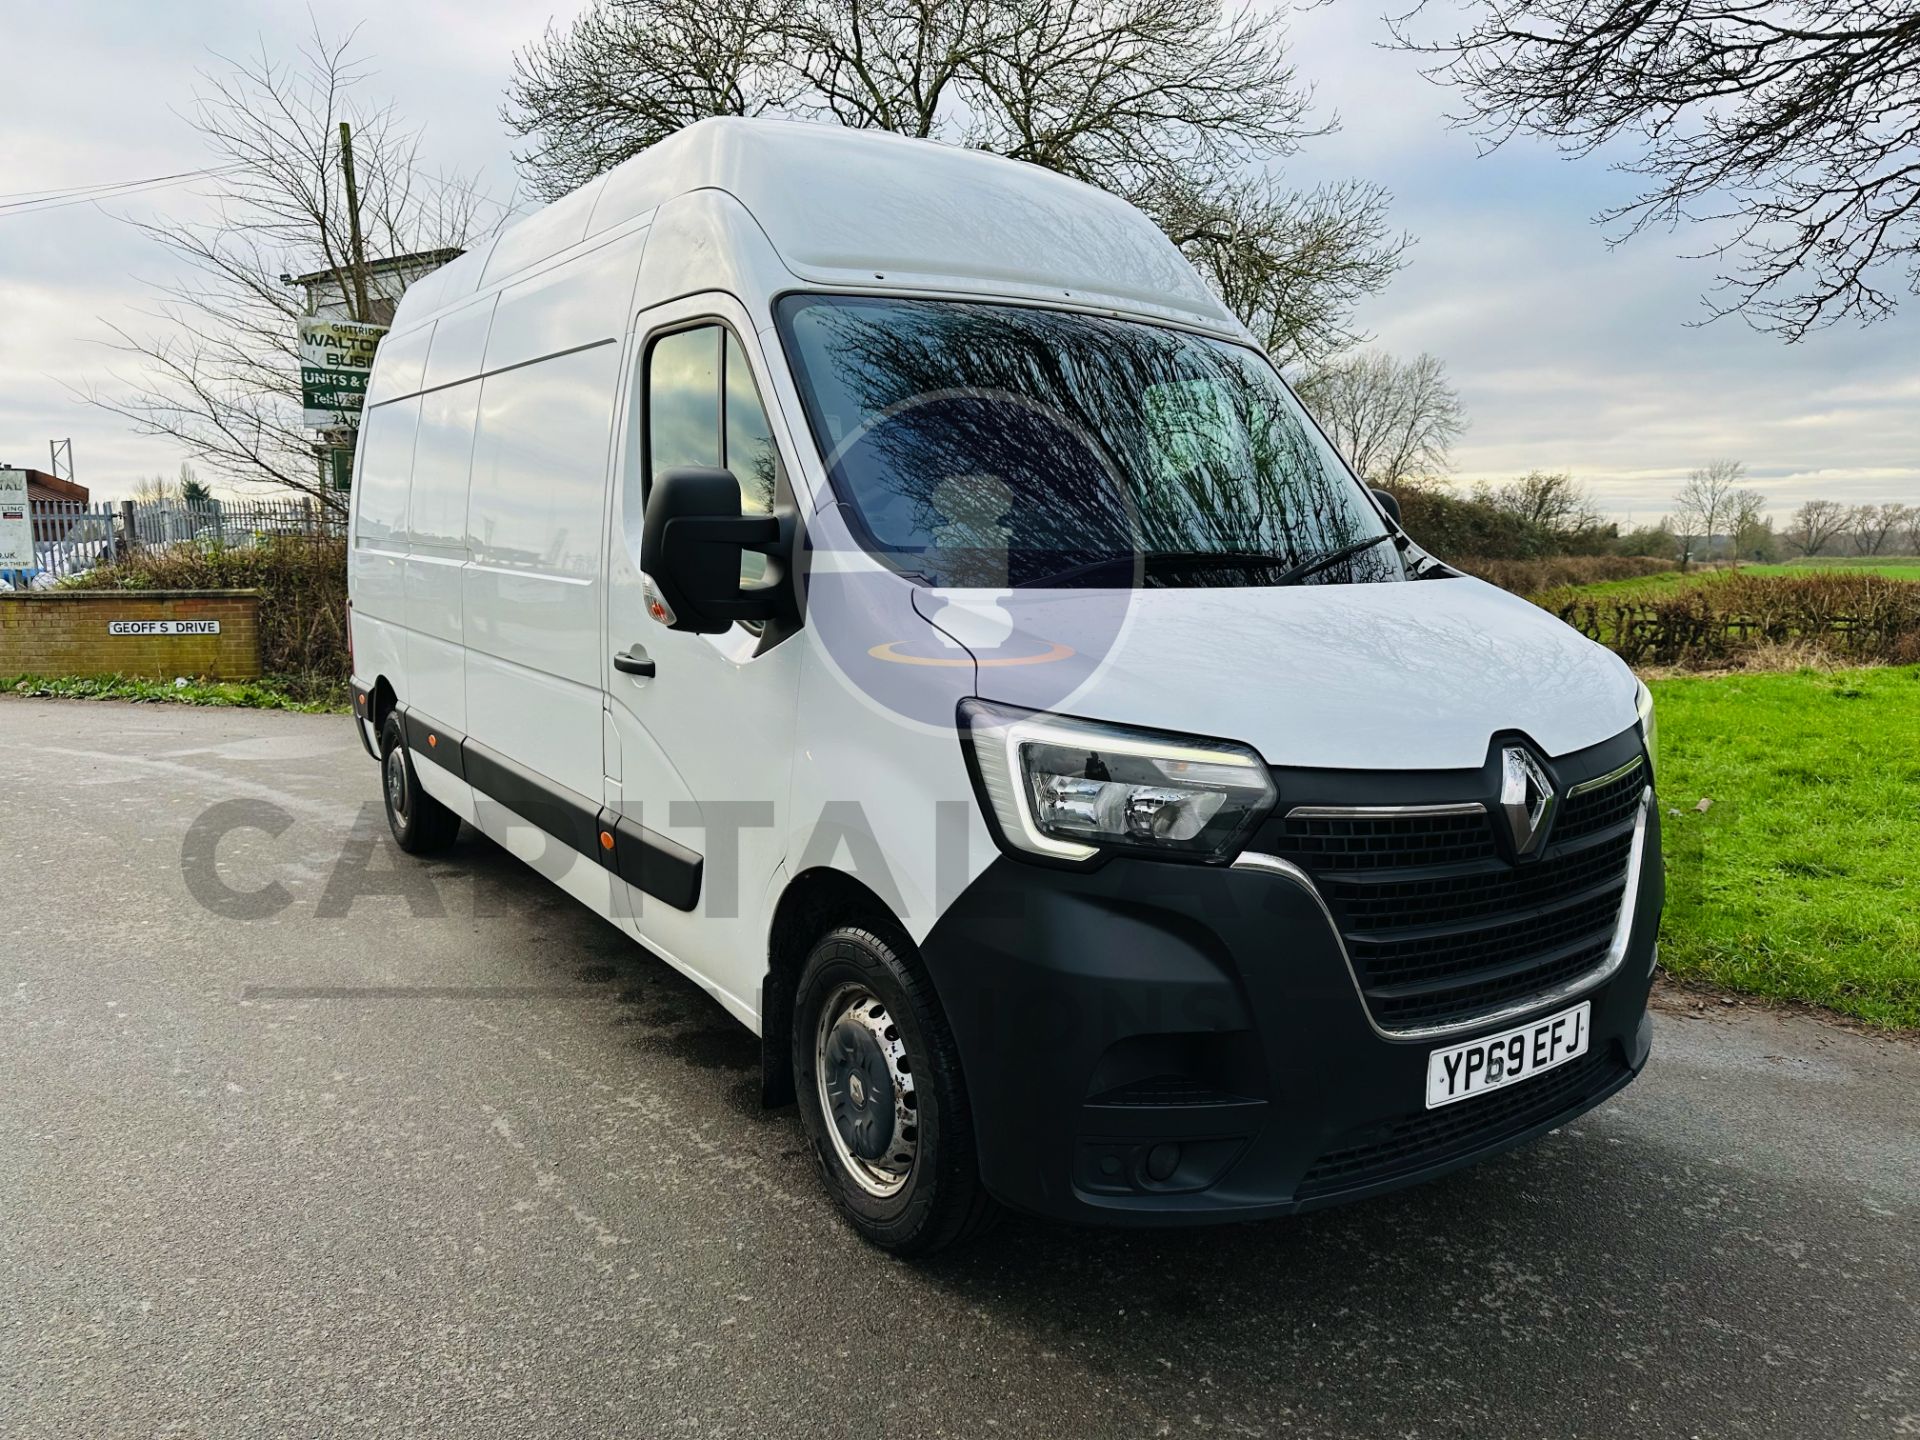 (ON SALE) RENAULT MASTER 2.3 DCI LWB *BUSINESS EDITION* - 2020 MODEL - ONLY 85K MILES - EURO 6 - Image 2 of 25